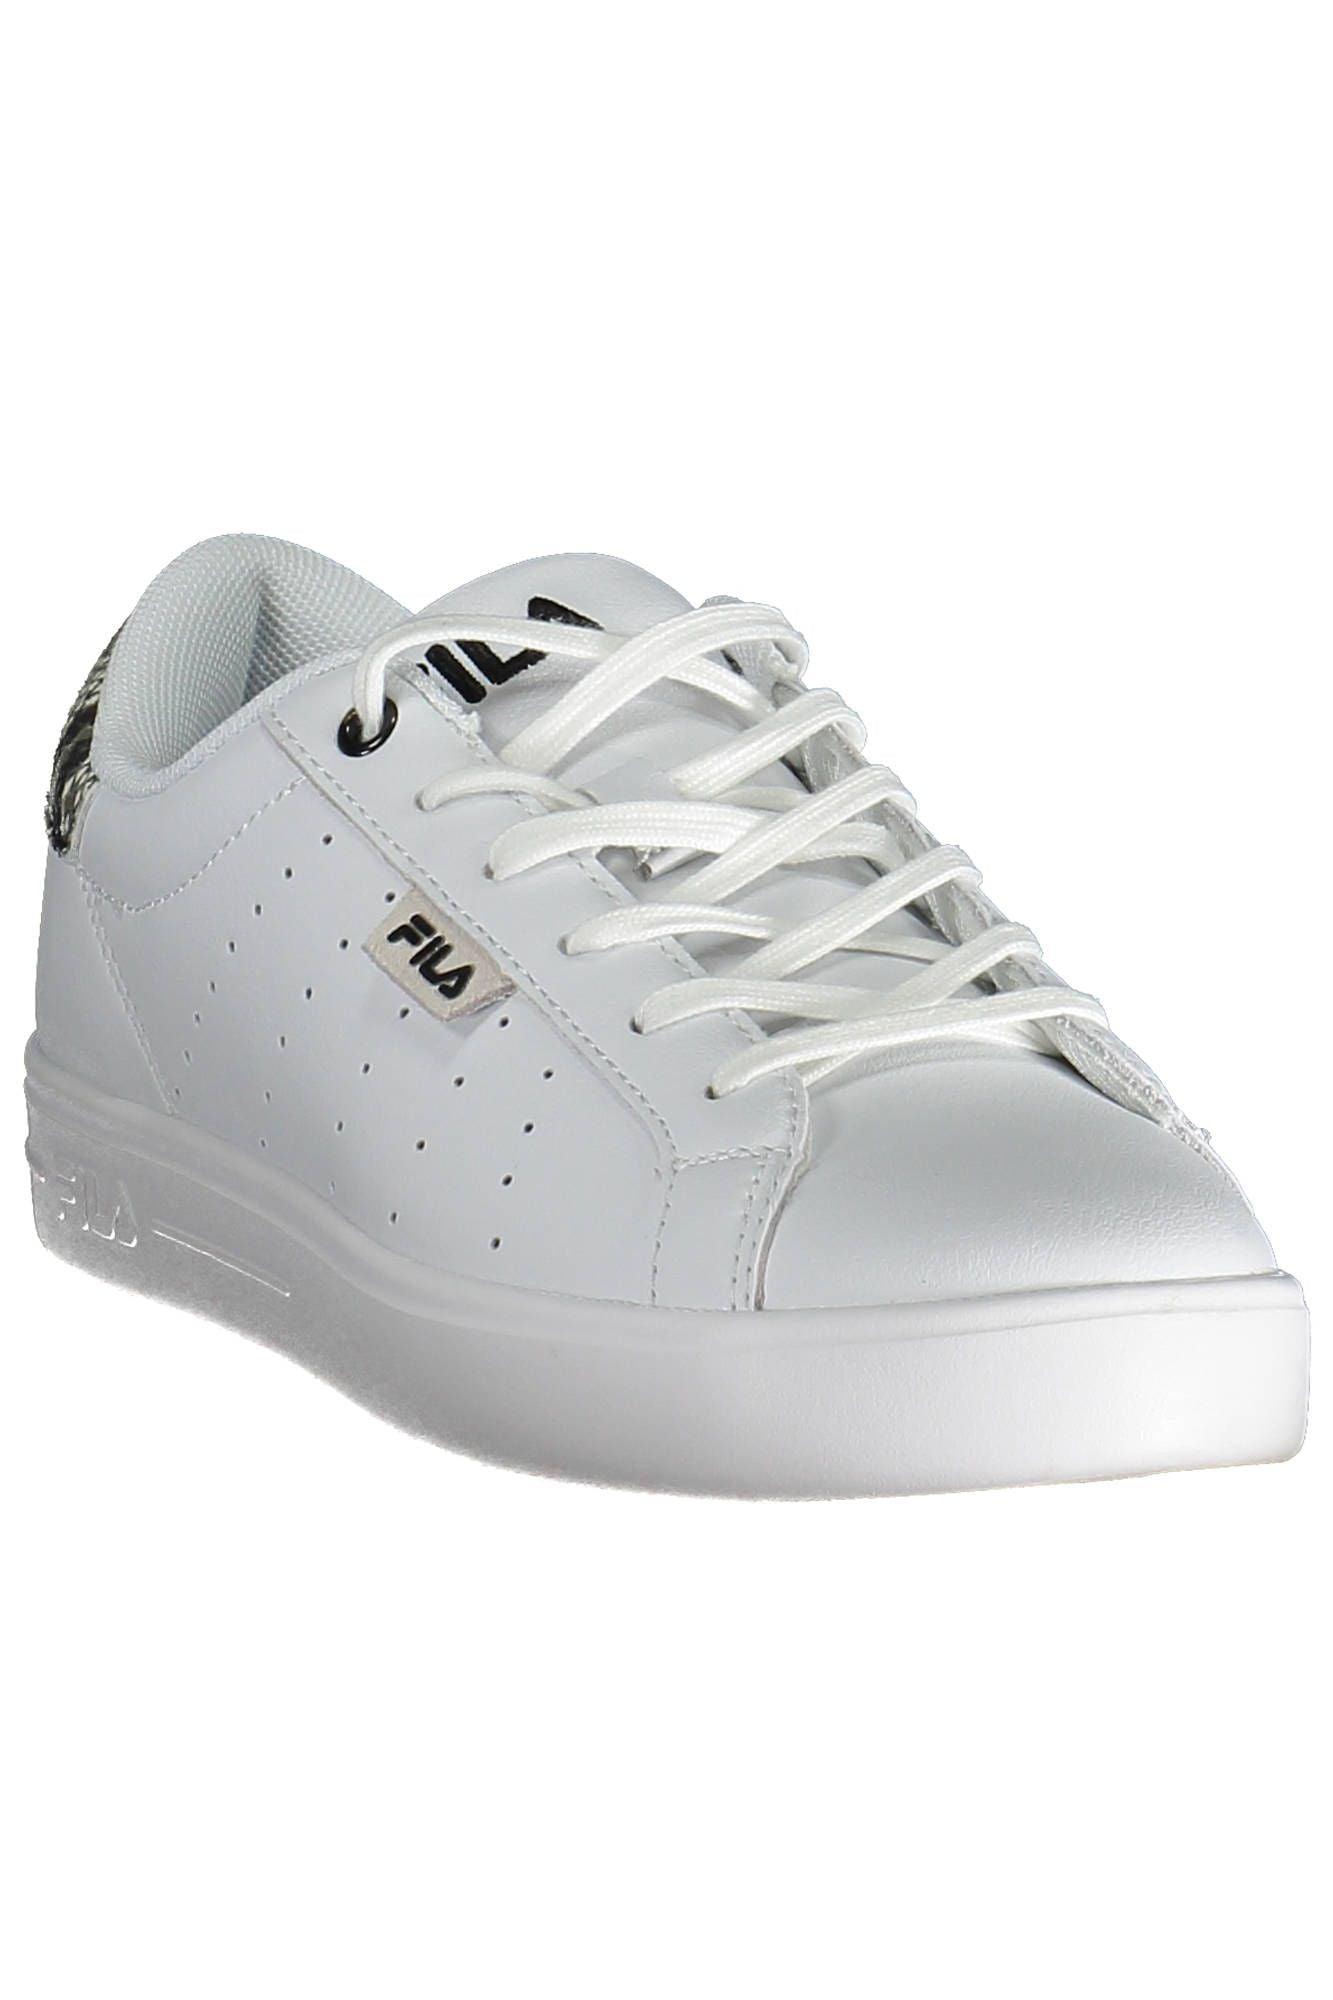 Fila Chic White Sports Sneakers with Contrasting Details - PER.FASHION